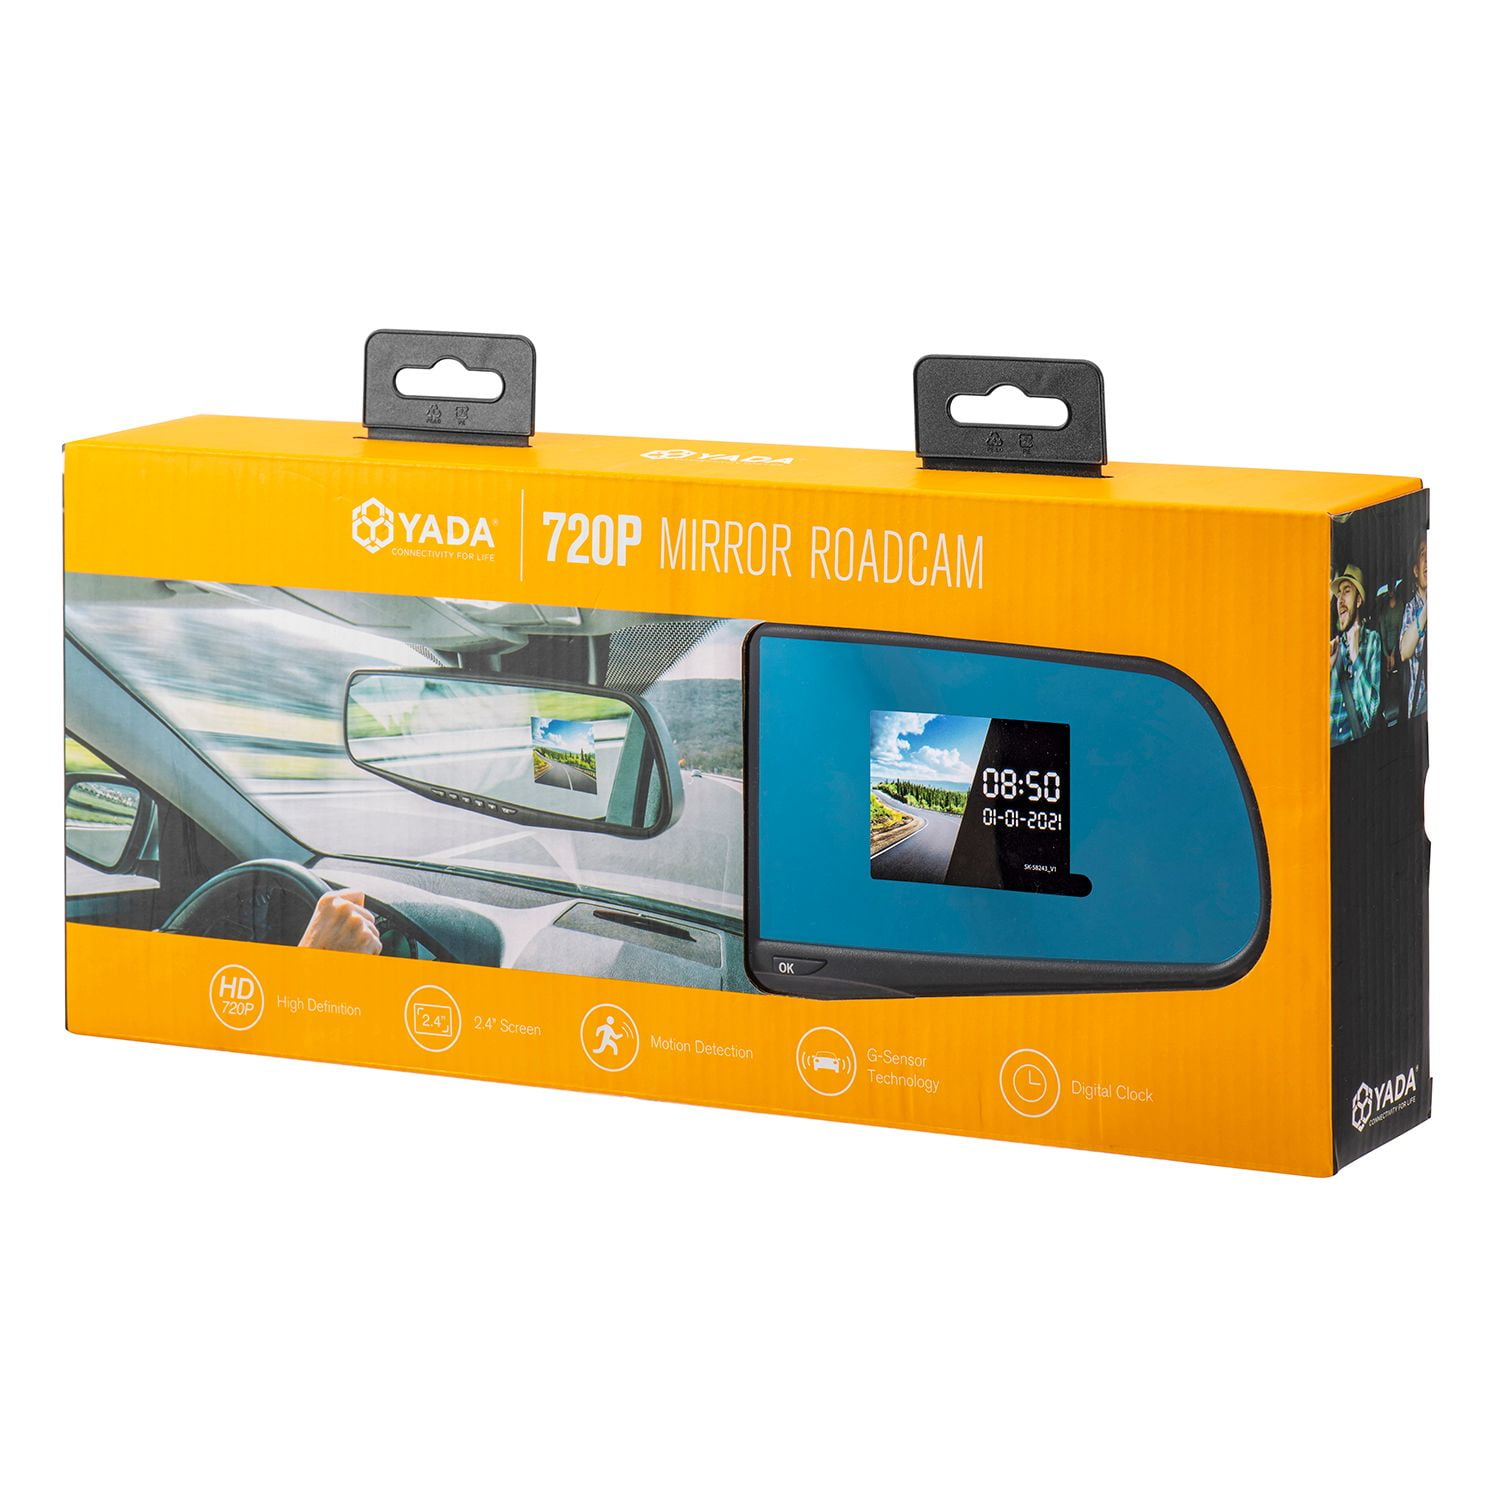 Yada RoadCam 720p Mirror Camera, 120 Degree Wide Angle Lense, 2.4" LCD, G-Sensor Technology with Park and Record Mode, Loop Recording